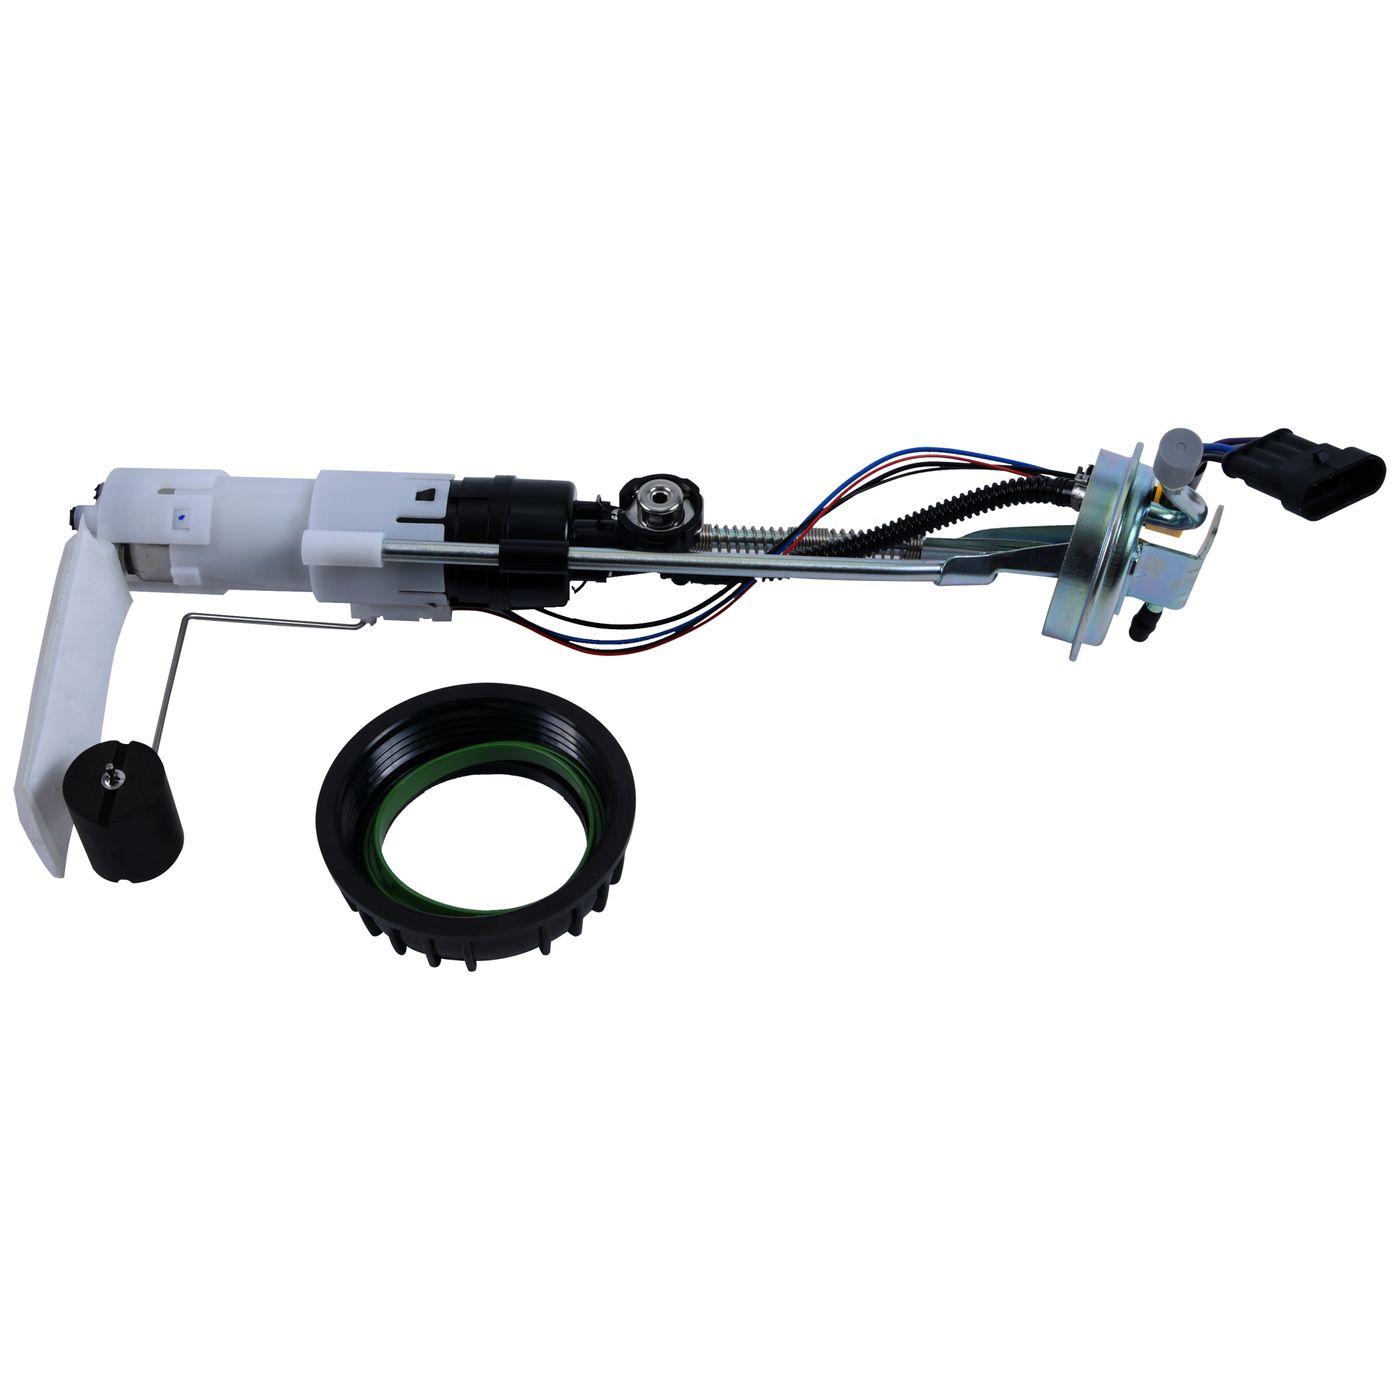 Wrp Fuel Pump Modules - WRP471024 image